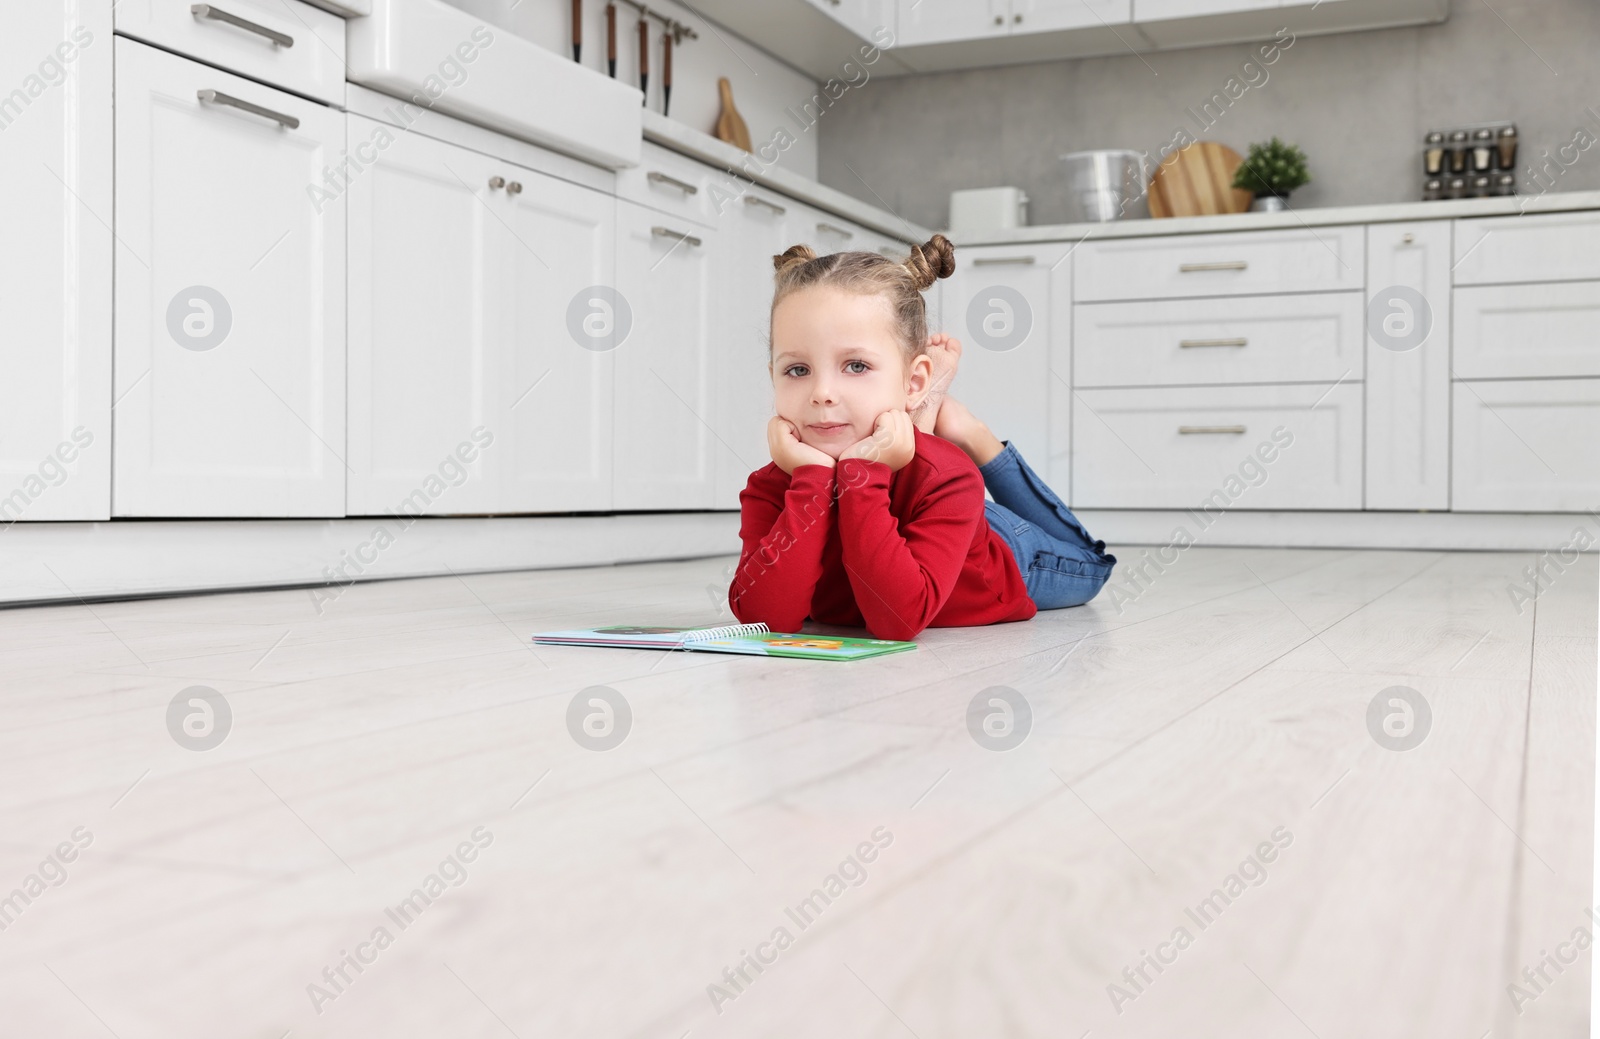 Photo of Cute little girl with book on warm floor in kitchen. Heating system